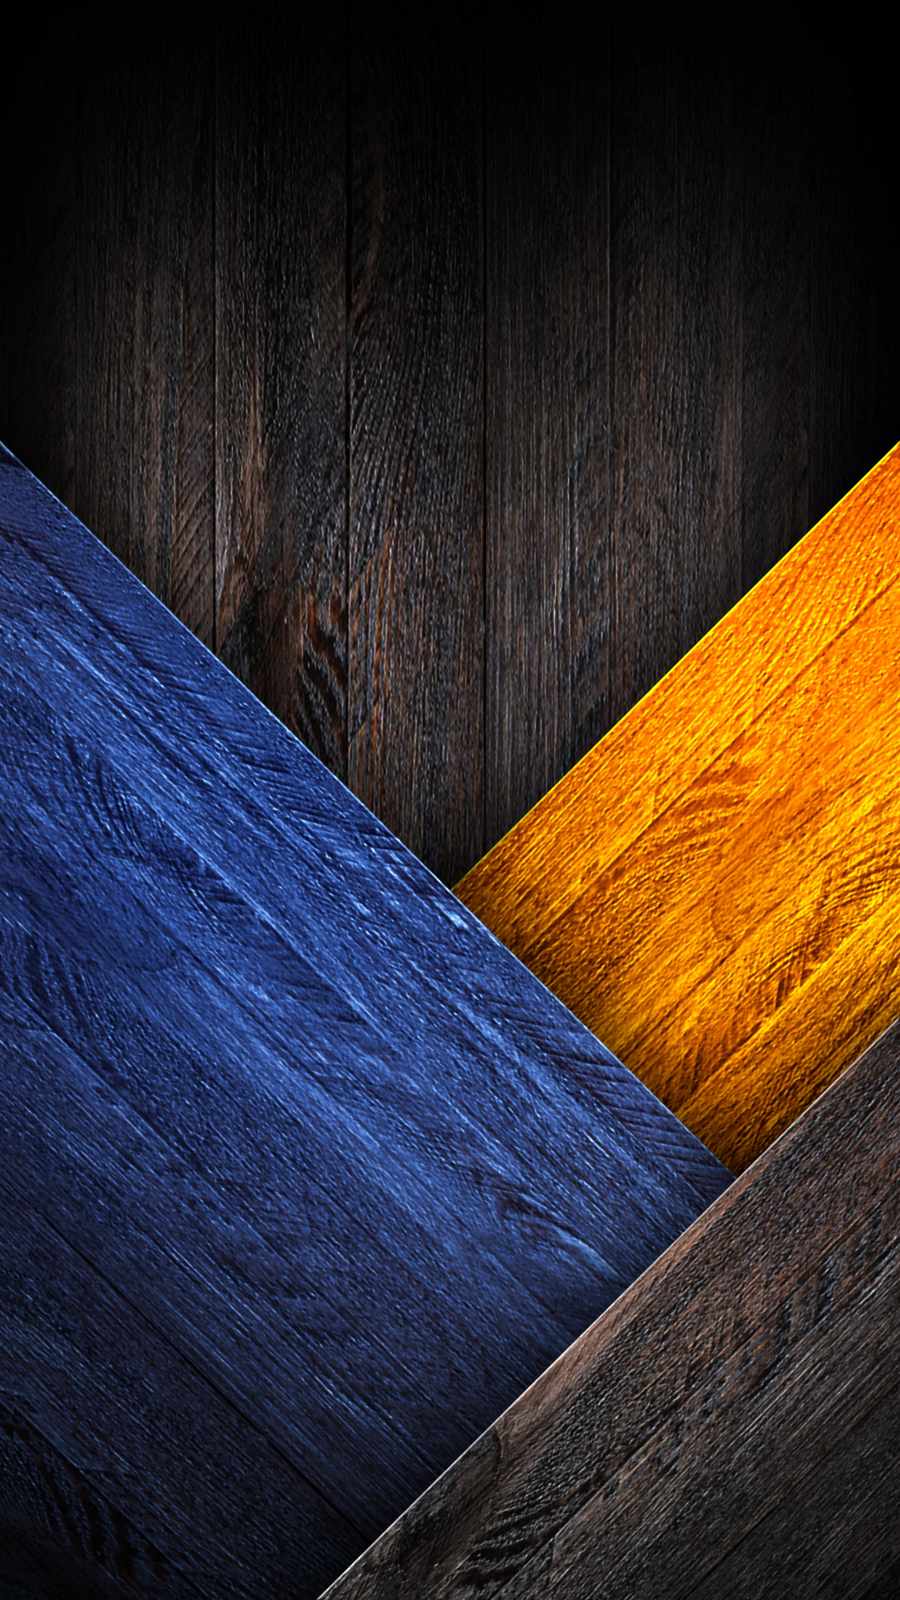 Colorful Wood Texture - IPhone Wallpapers : iPhone Wallpapers